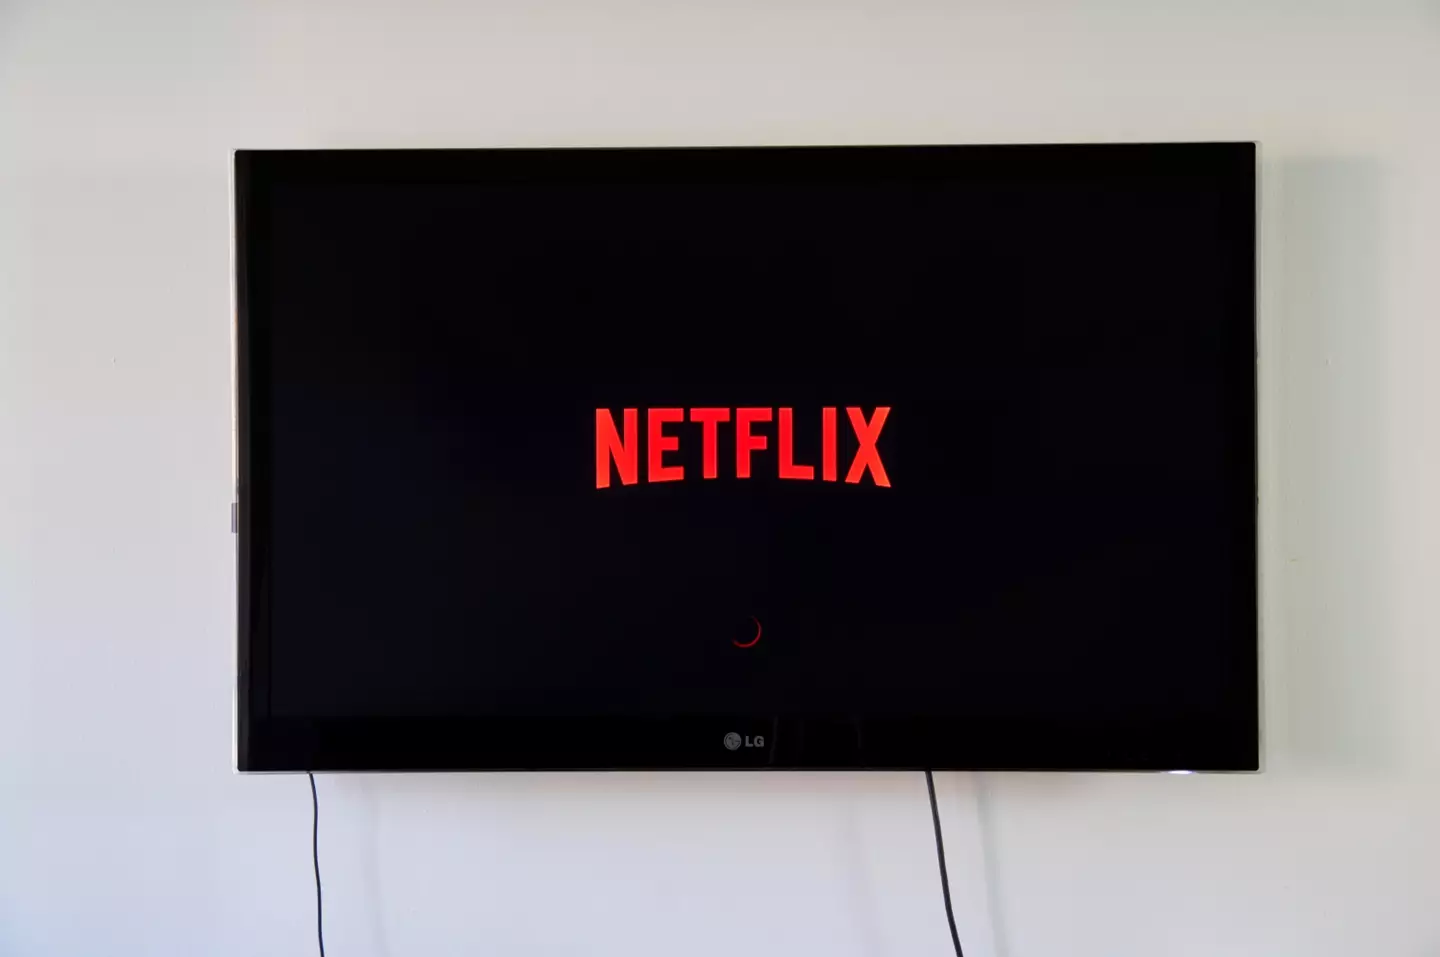 The update has caused Netflix users to think outside of the box.